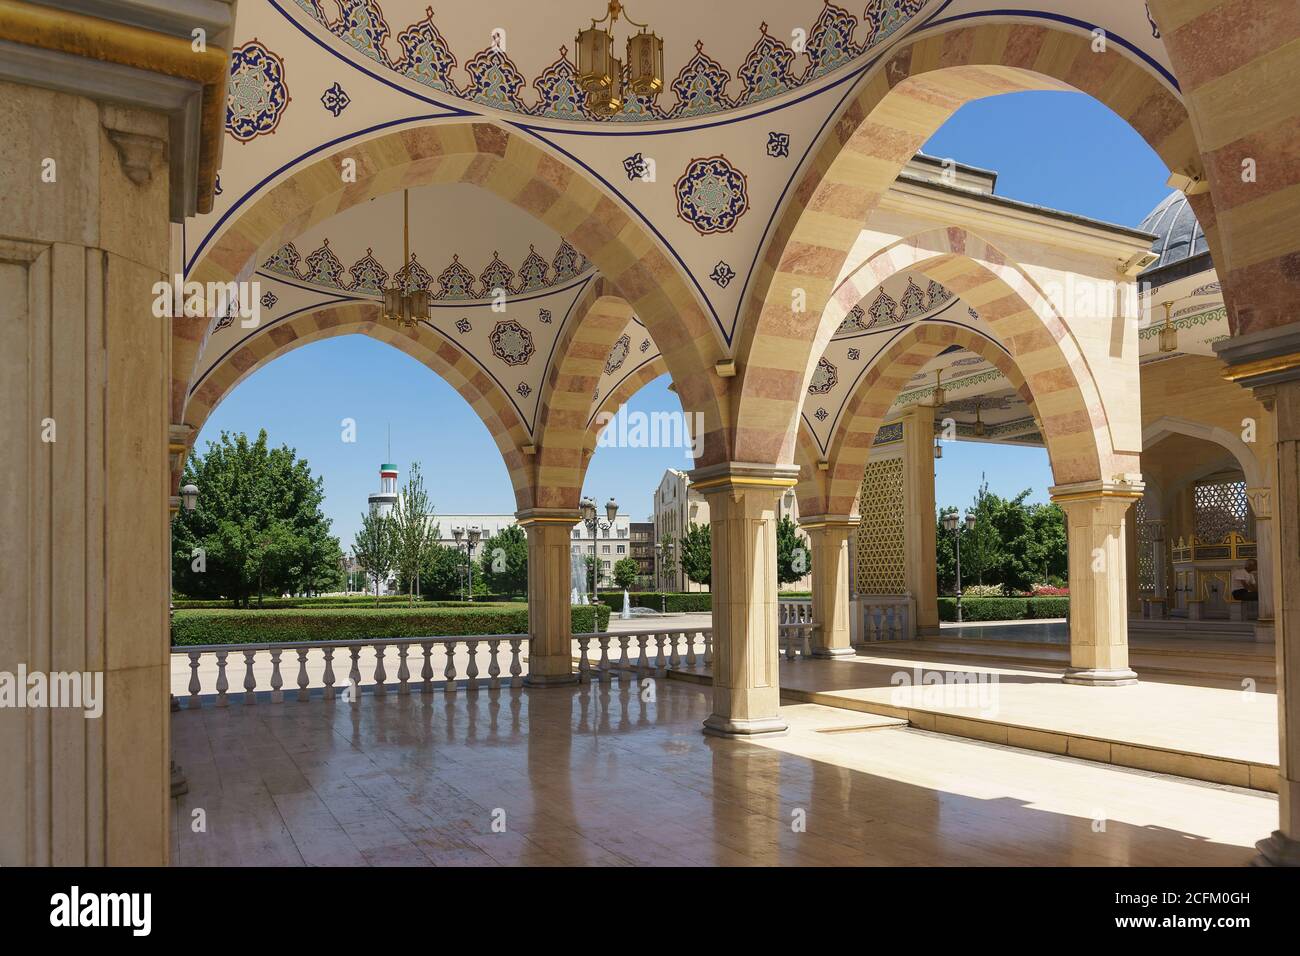 Grozny, Chechen, Russia - June 02, 2019: the Vaults of the summer gallery of the new mosque Heart of Chechnya named after Akhmat Kadyrov painted in th Stock Photo